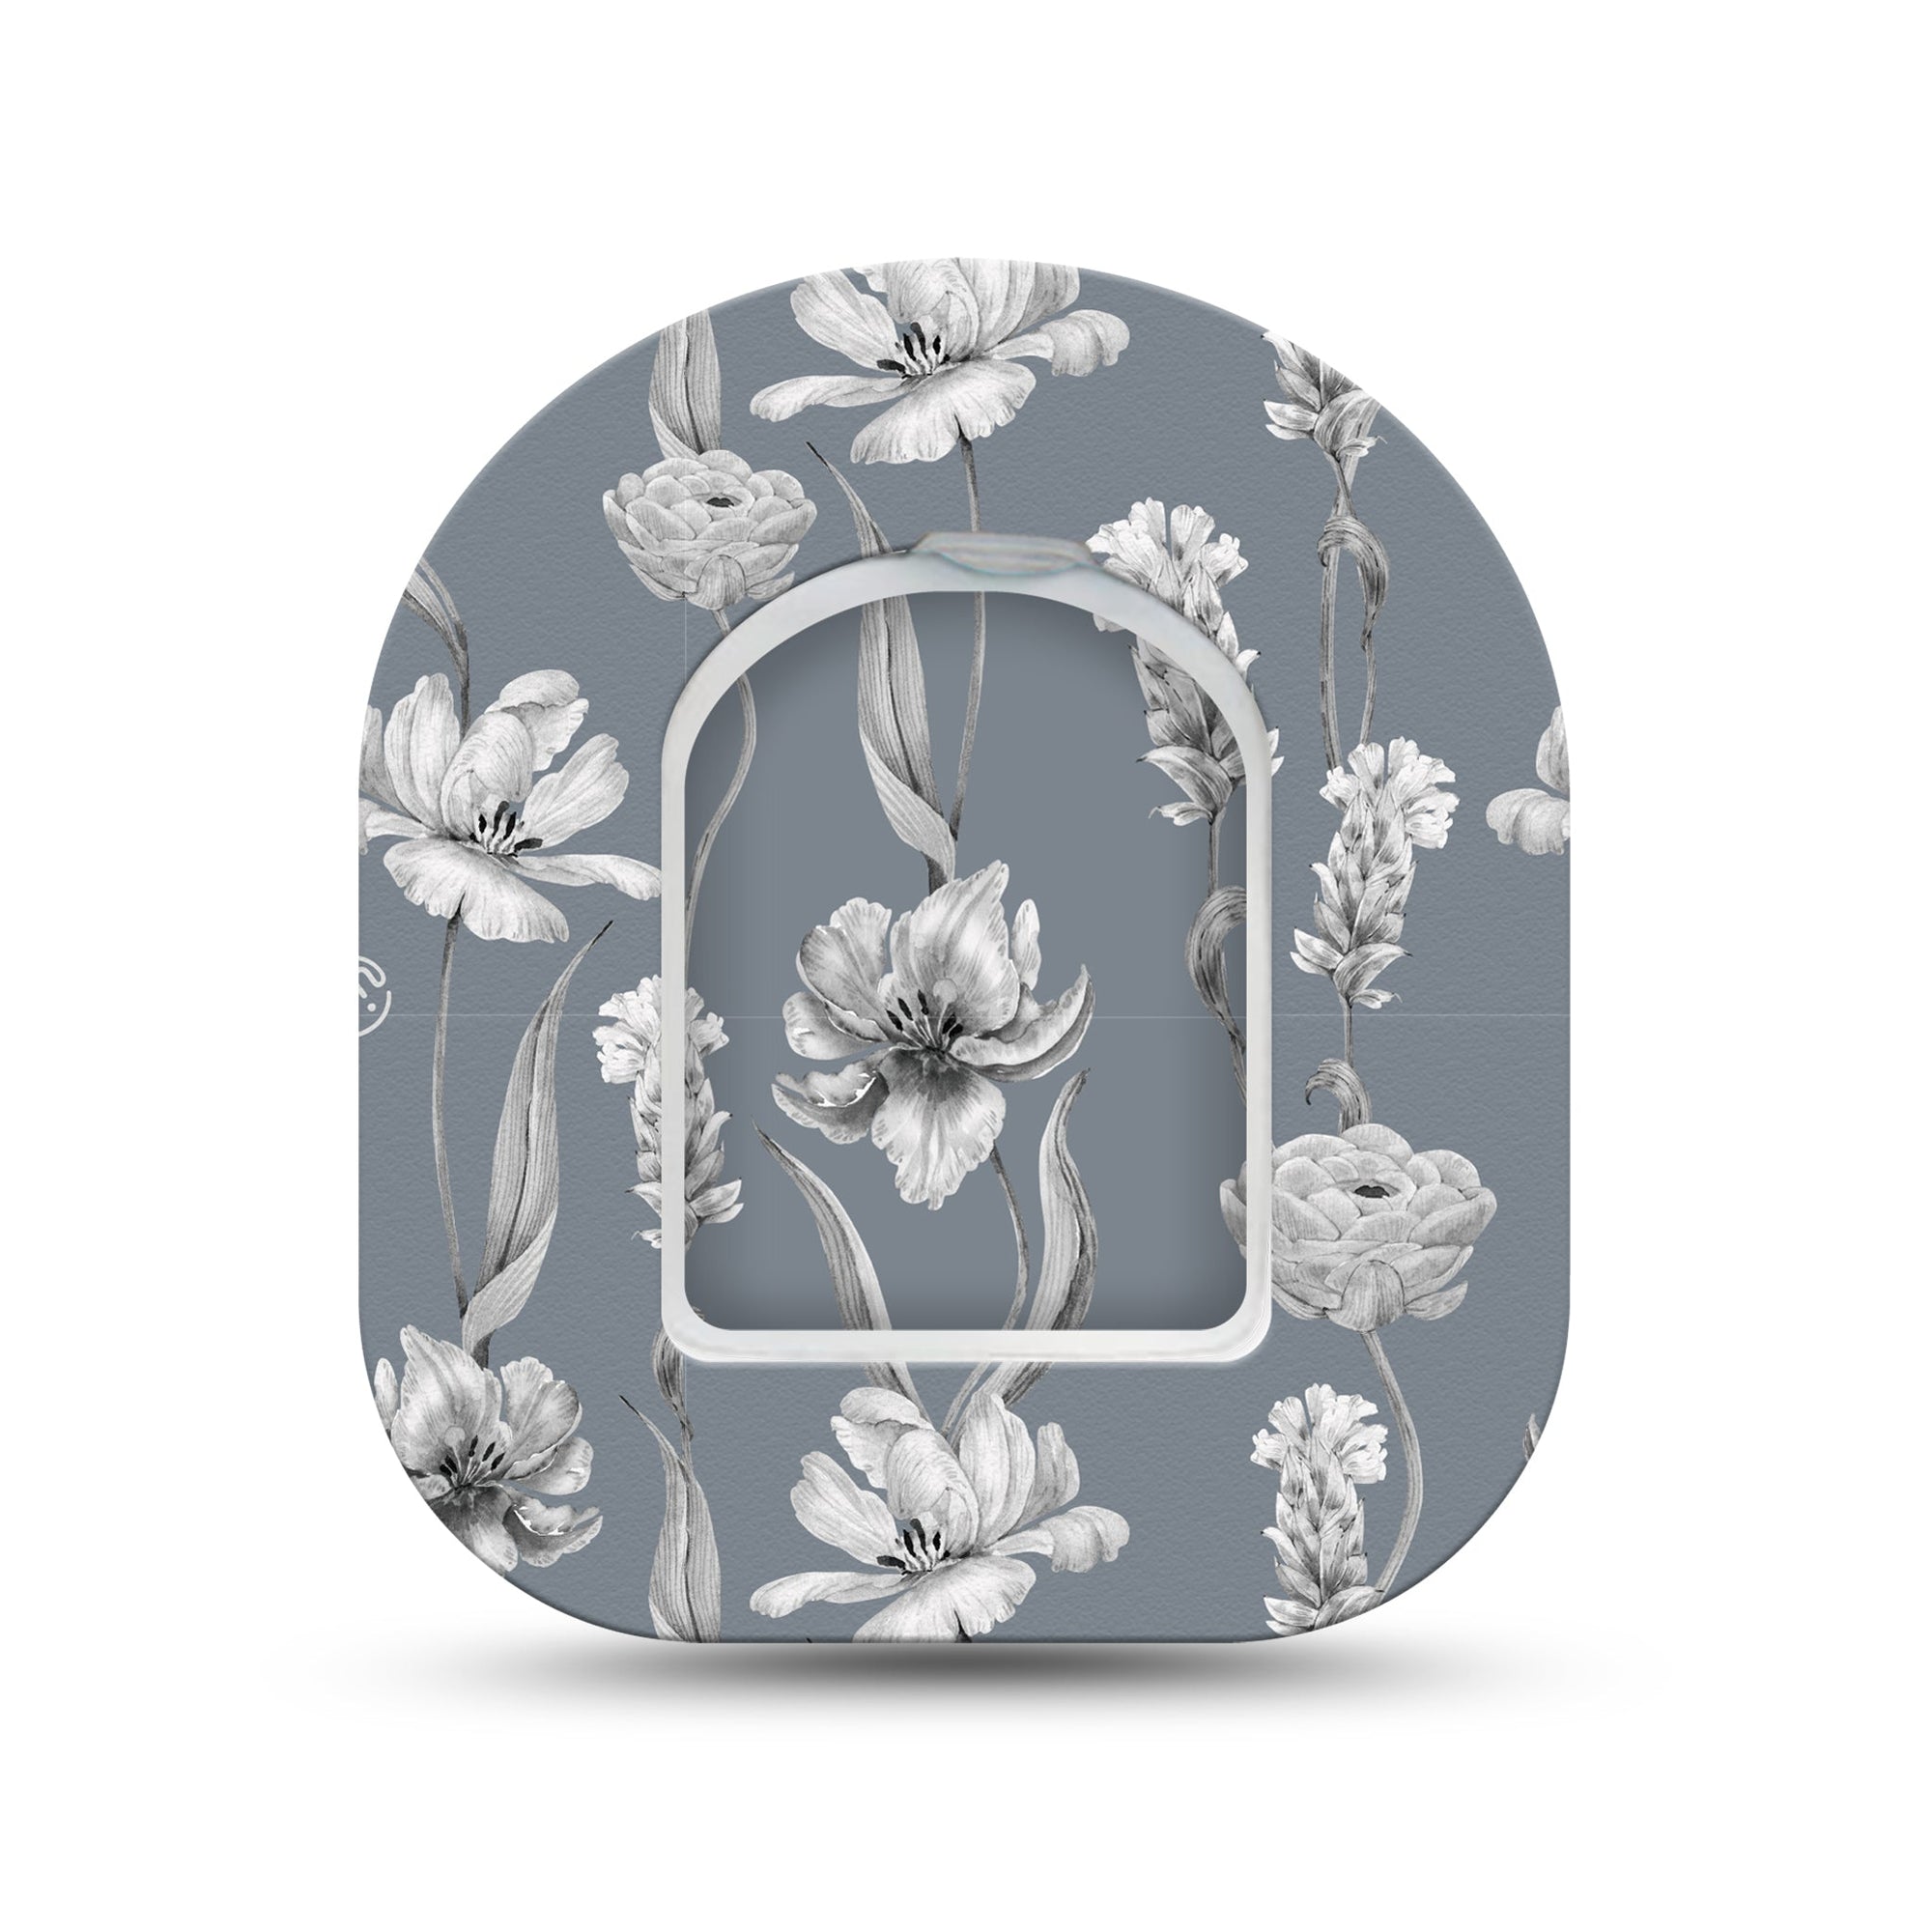 ExpressionMed Muted Petals Pod Mini Tape Single Sticker and Single Tape, Gentle Blooms Overlay Patch Pump Design